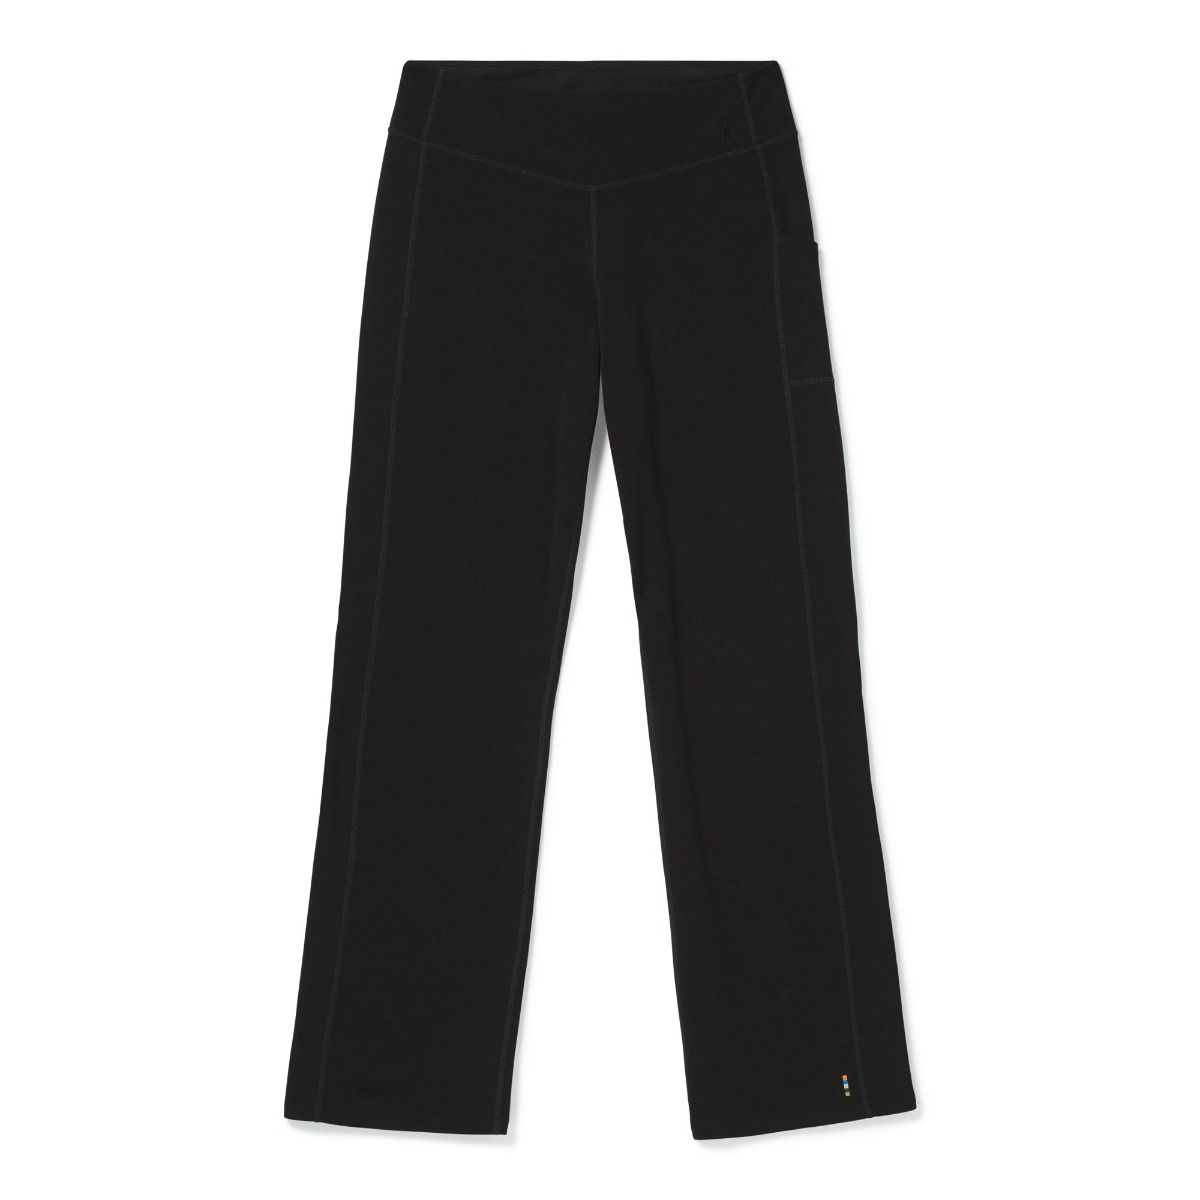 ✨PREORDER✨ women's leggings, spring and summer high-waist stretch straight  casual pants, women's trousers, thin cropped trousers Size M-5XL $20 -  HoneyBee Brunei